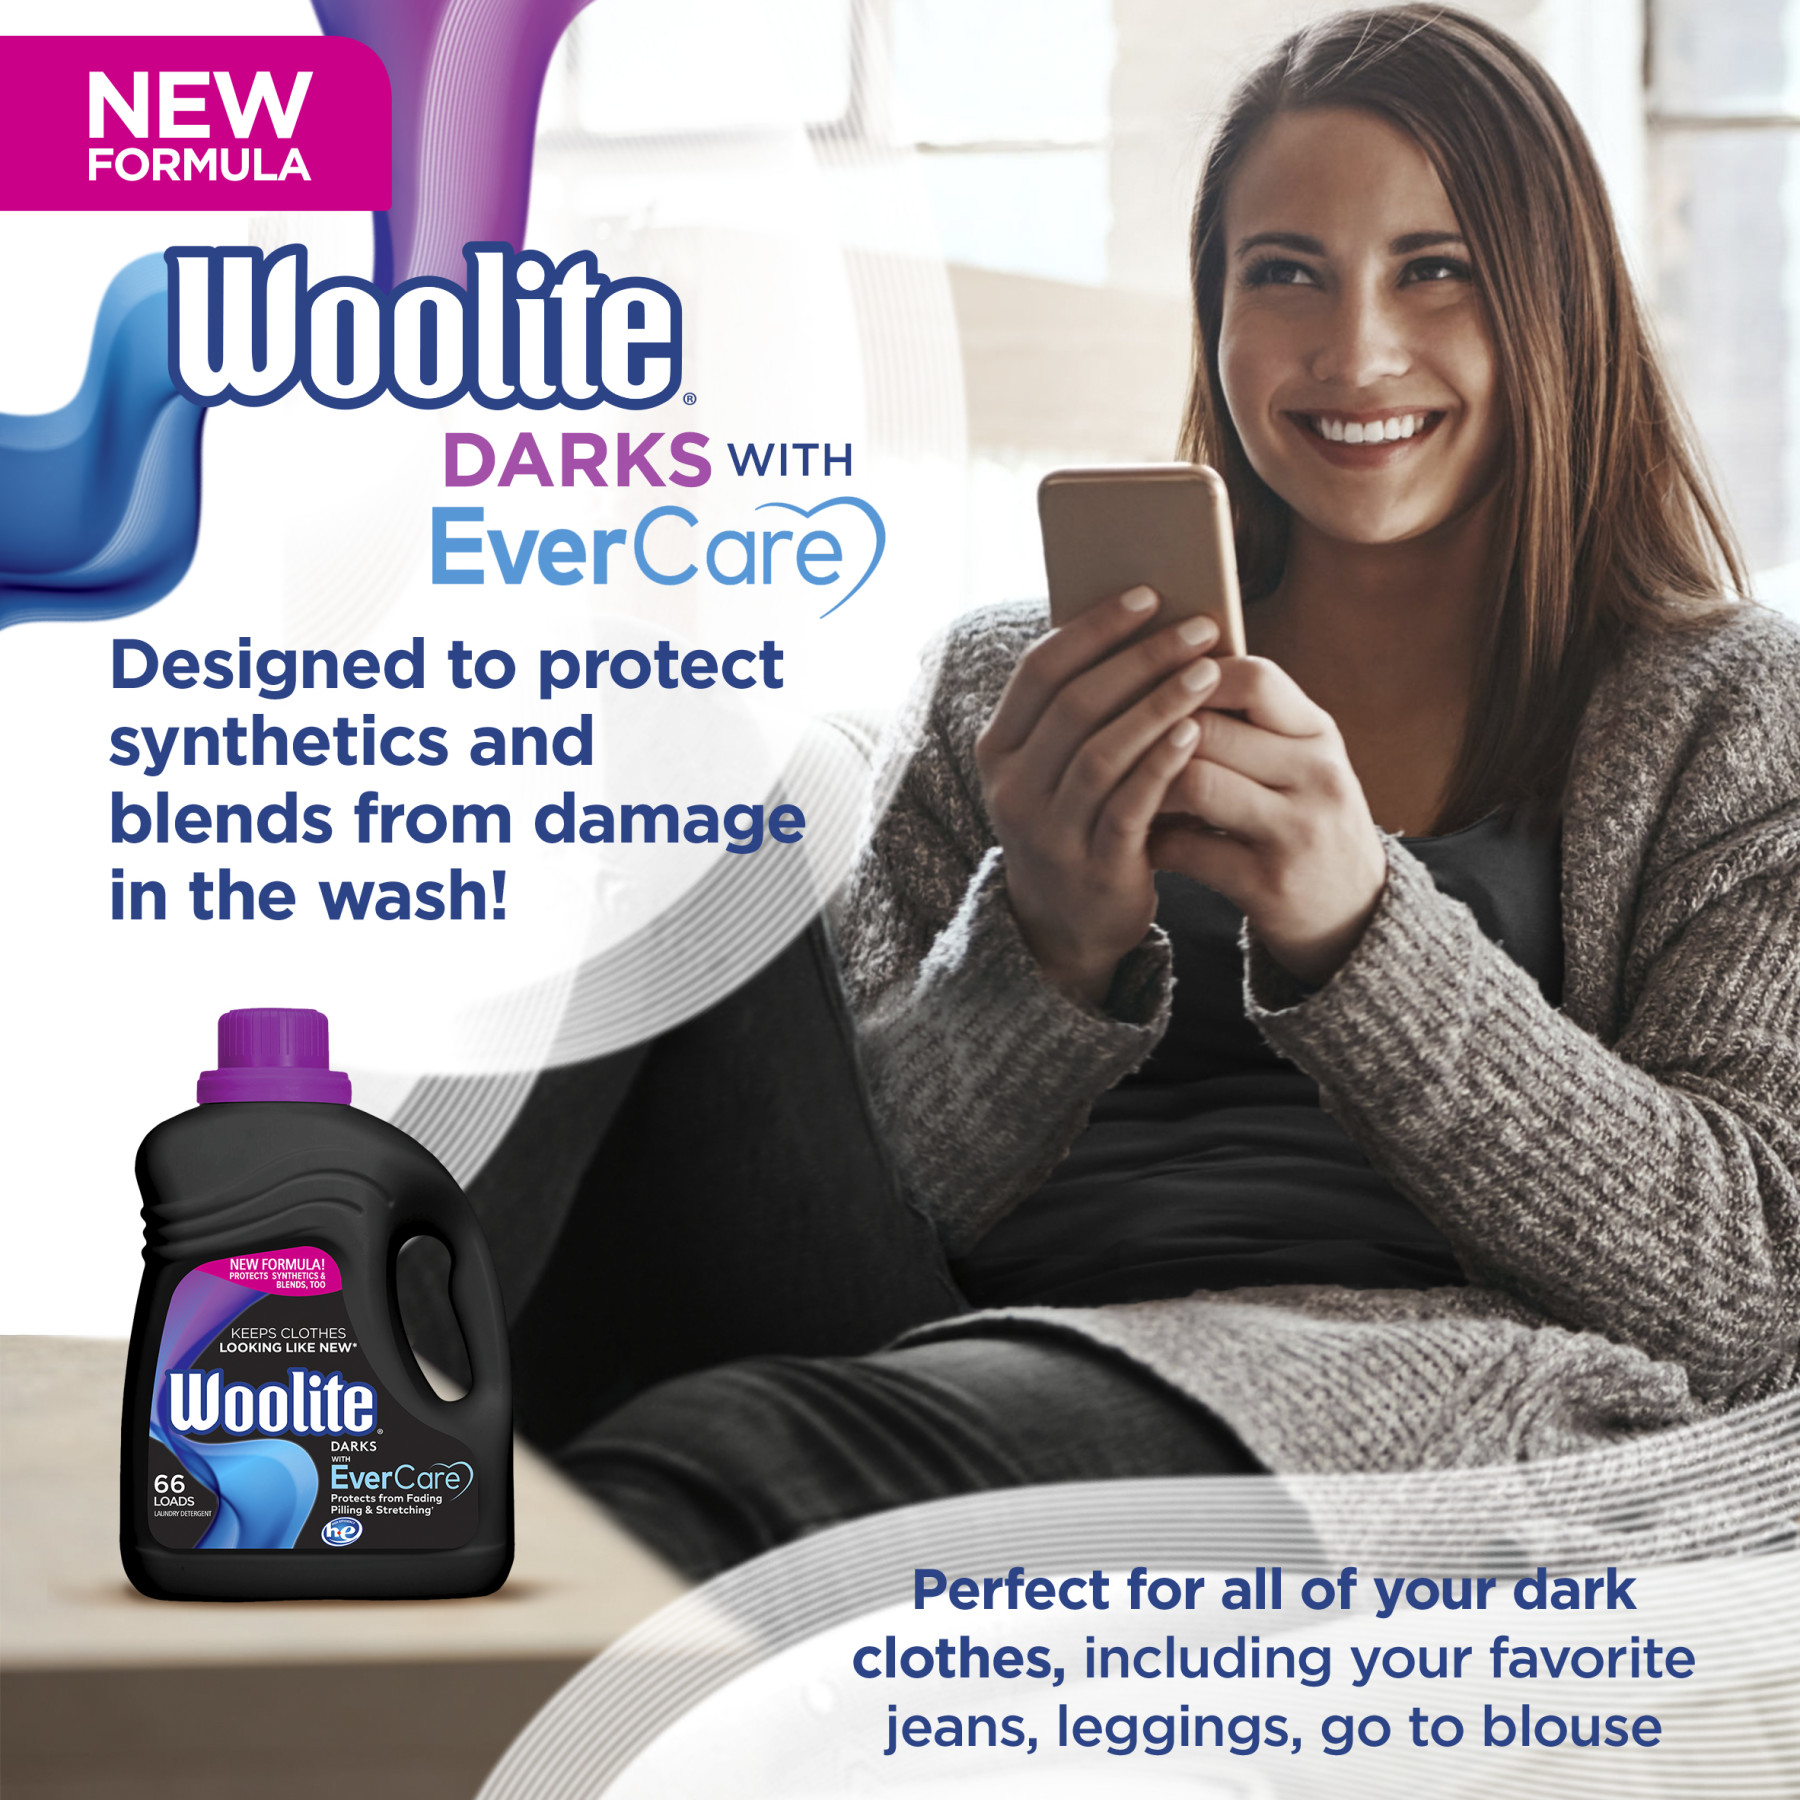 Woolite All DARKS Liquid Laundry Detergent, Midnight Breeze Scent, 83 Loads, 125oz, Regular & HE Washers, Dark & Black Clothes & Jeans, Packaging May Vary - image 2 of 6